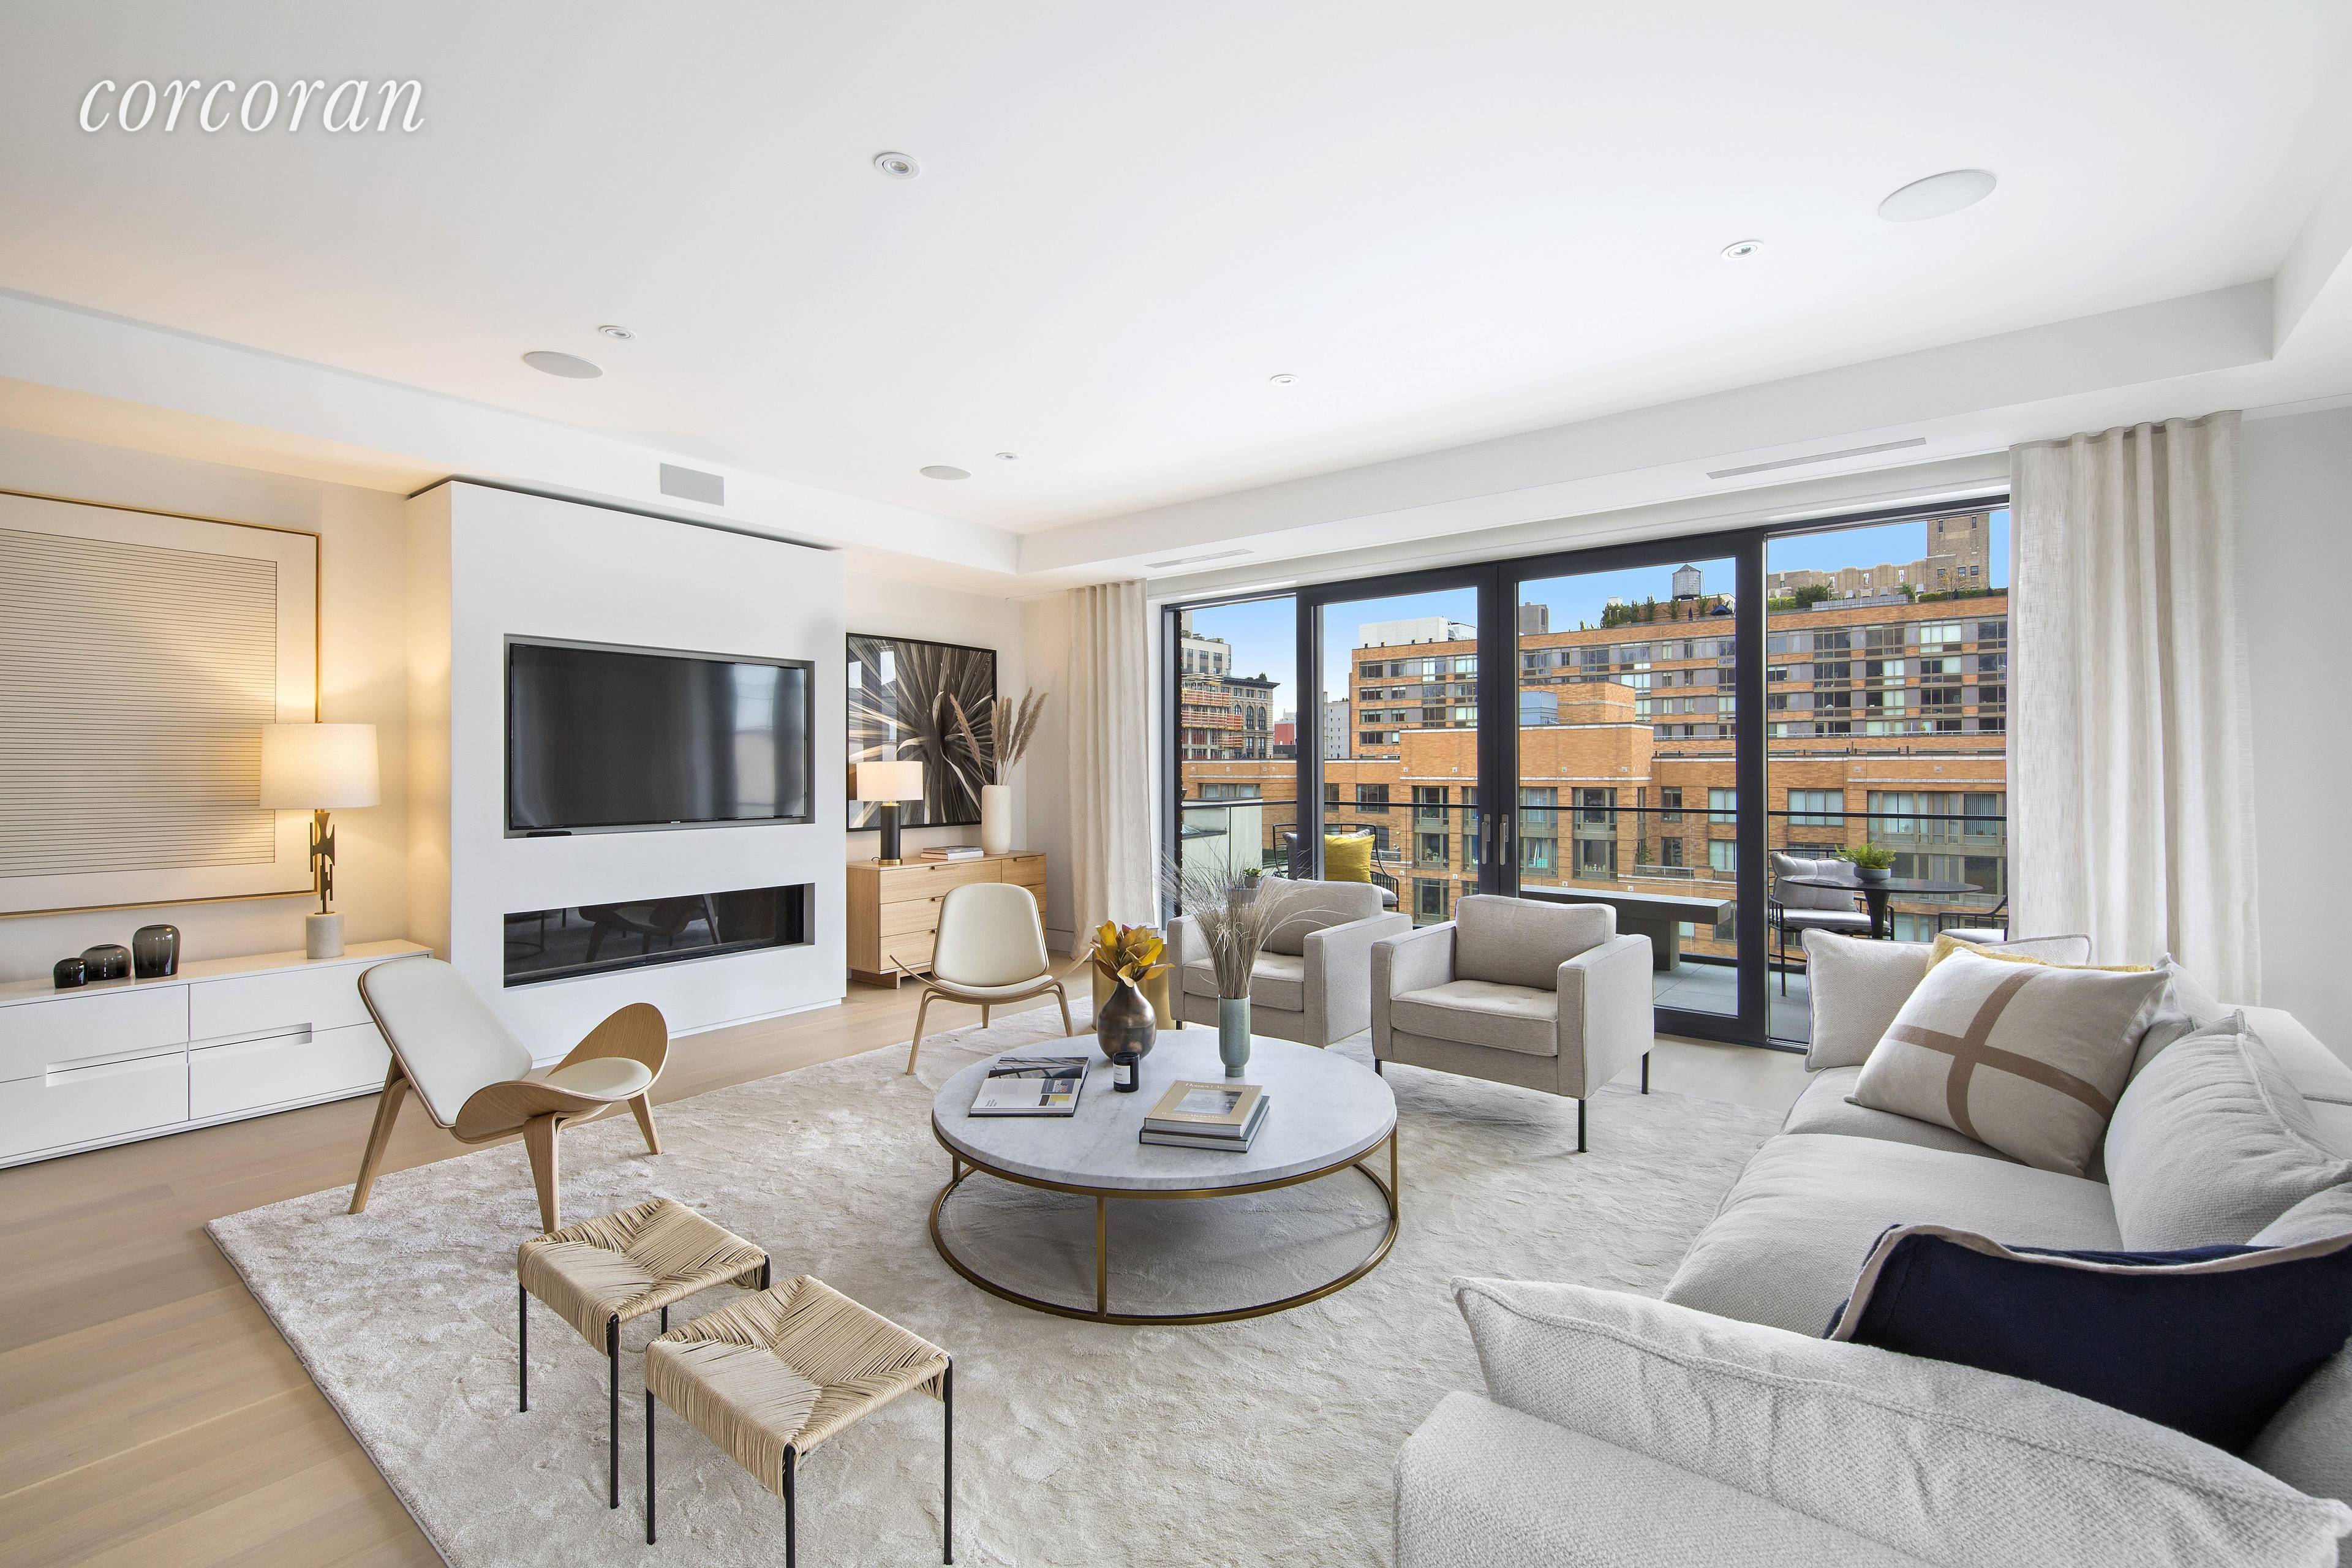 Refined living in the center of Chelsea.